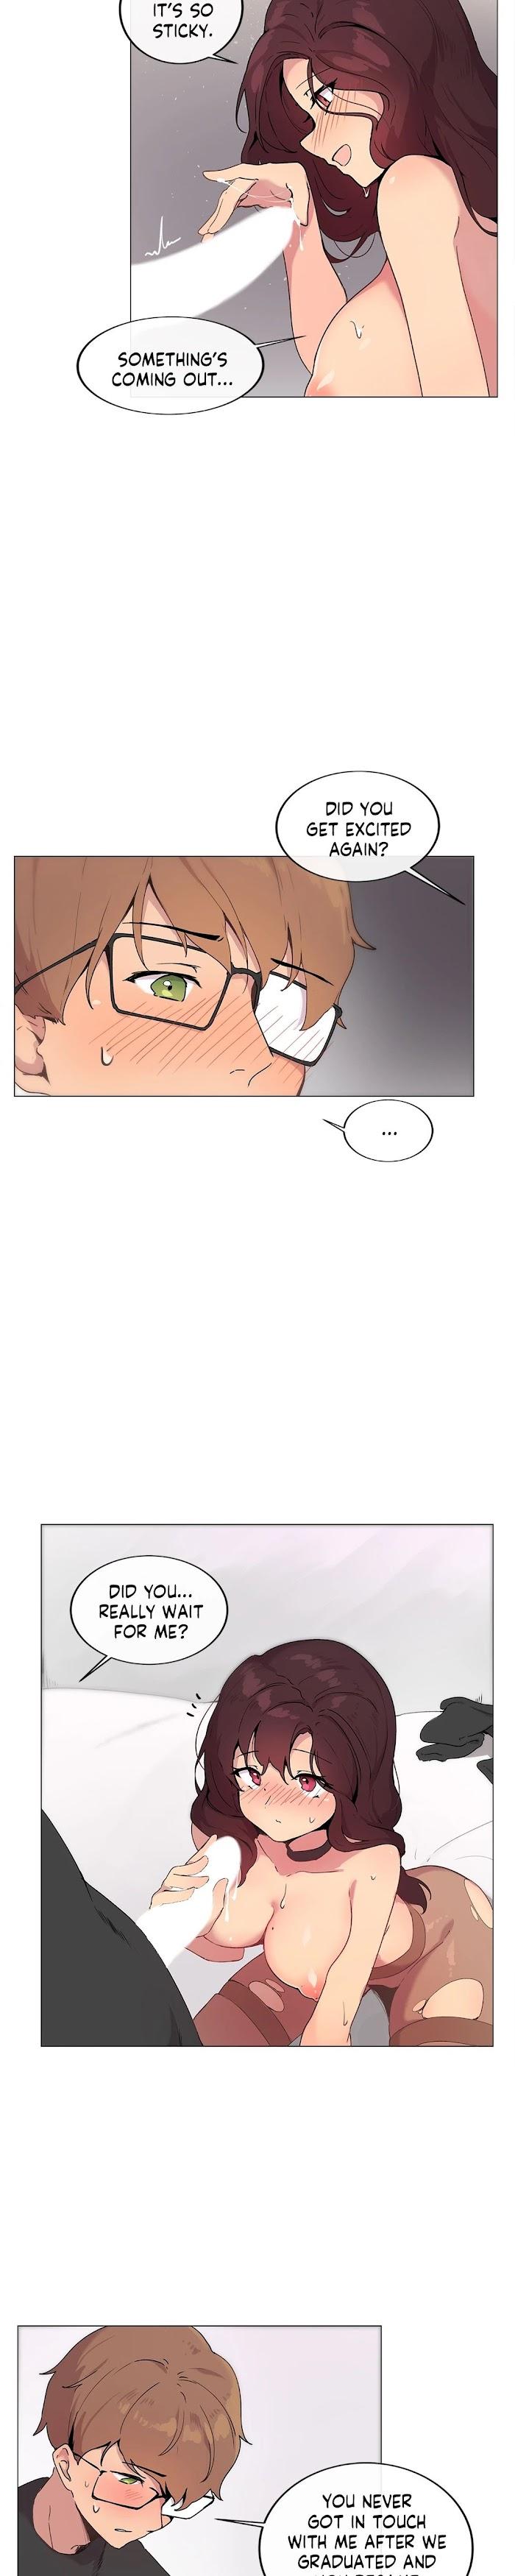 [Dumangoon, 130F] Sexcape Room: Wipe Out Ch.9/9 [English] [Manhwa PDF] Completed 124